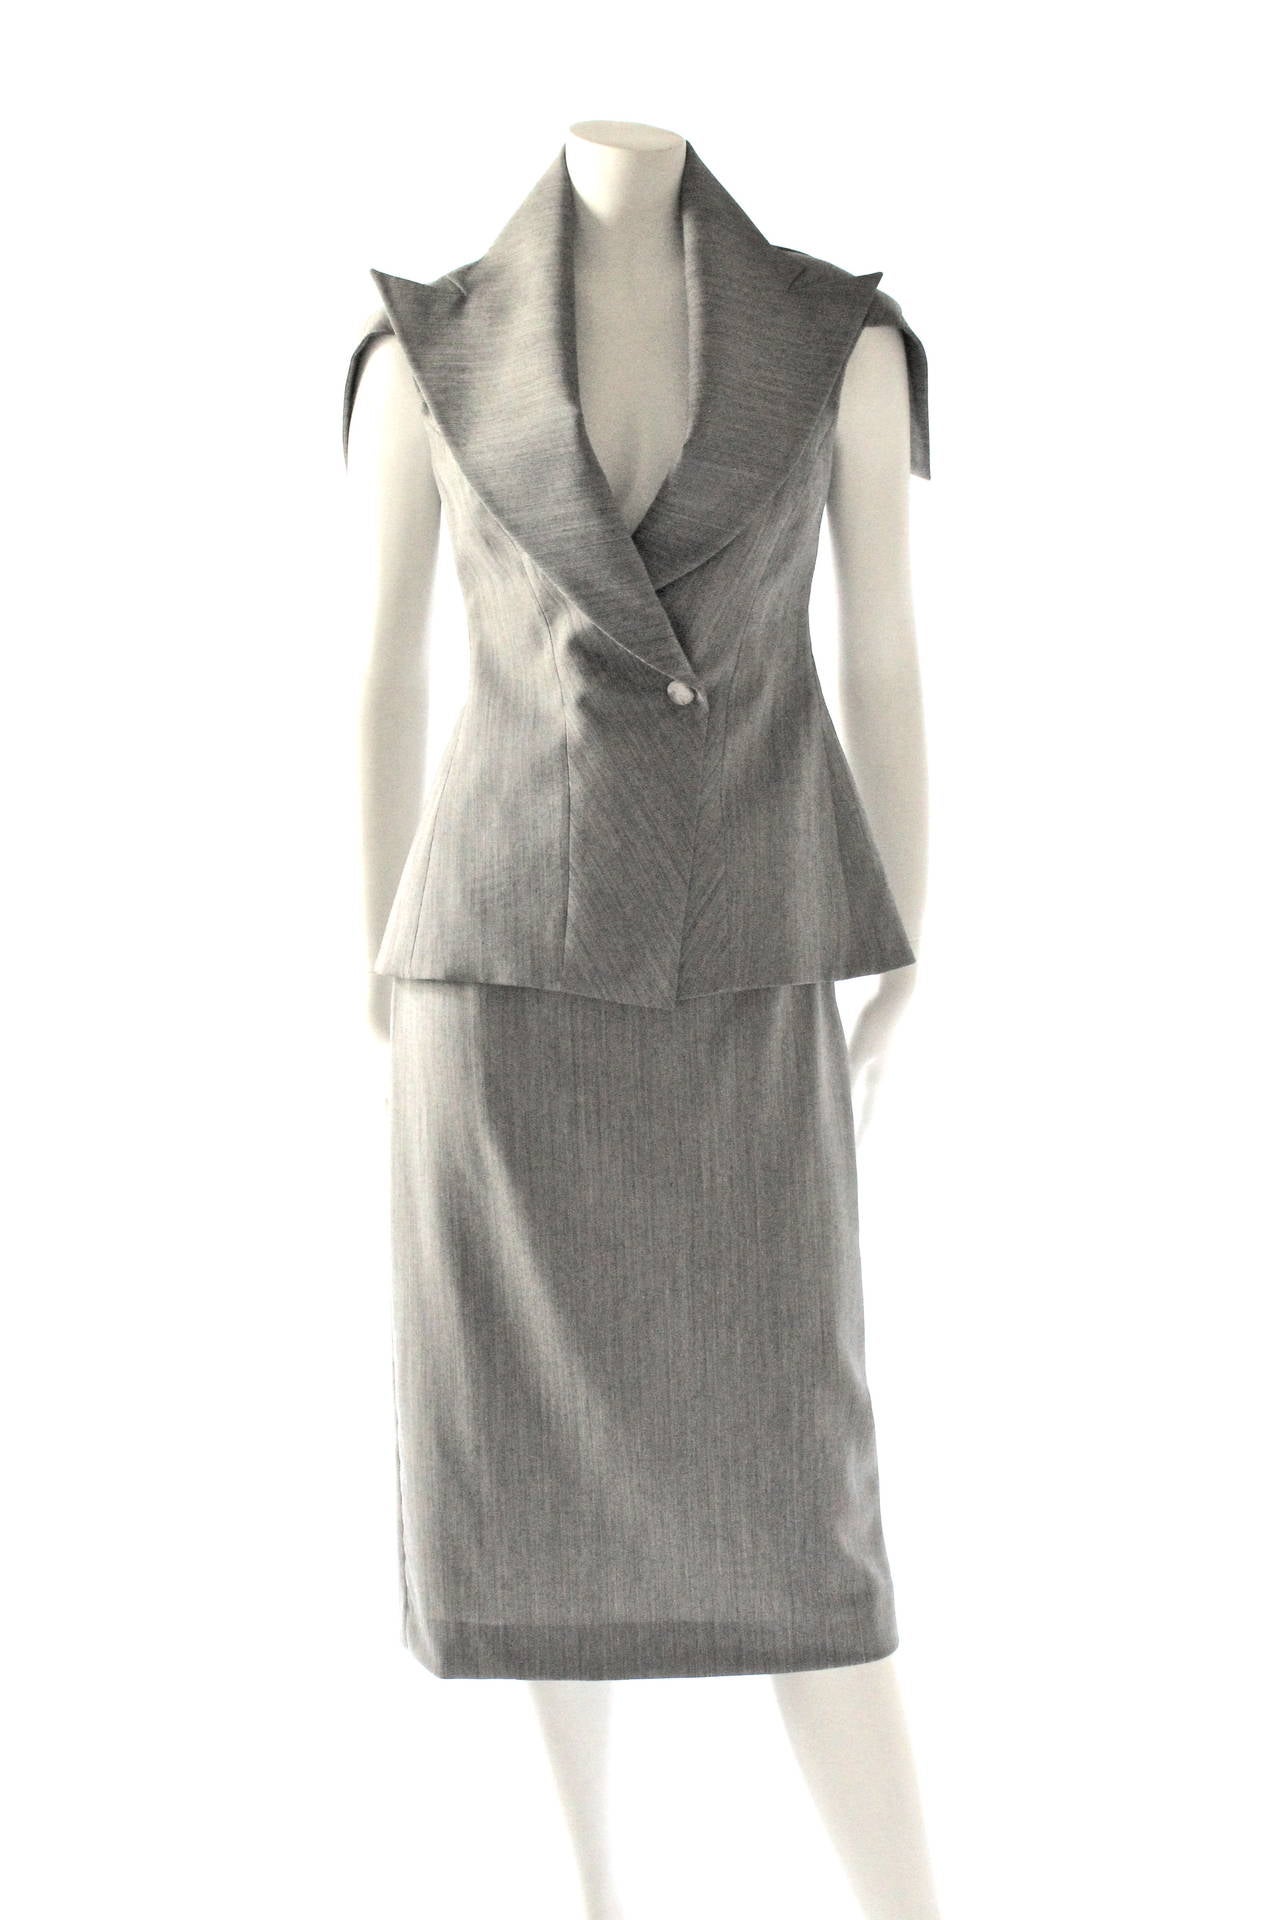 Alexander Mcqueen 'No13' Runway Jacket and Skirt

Origami folded jacket with inset Nude Back Panel and Pleated Peplum
Folded pleated waistband to skirt

Ref: Los Angeles County Museum of Art
Ref: Breaking the Mode p.55

Rare piece with